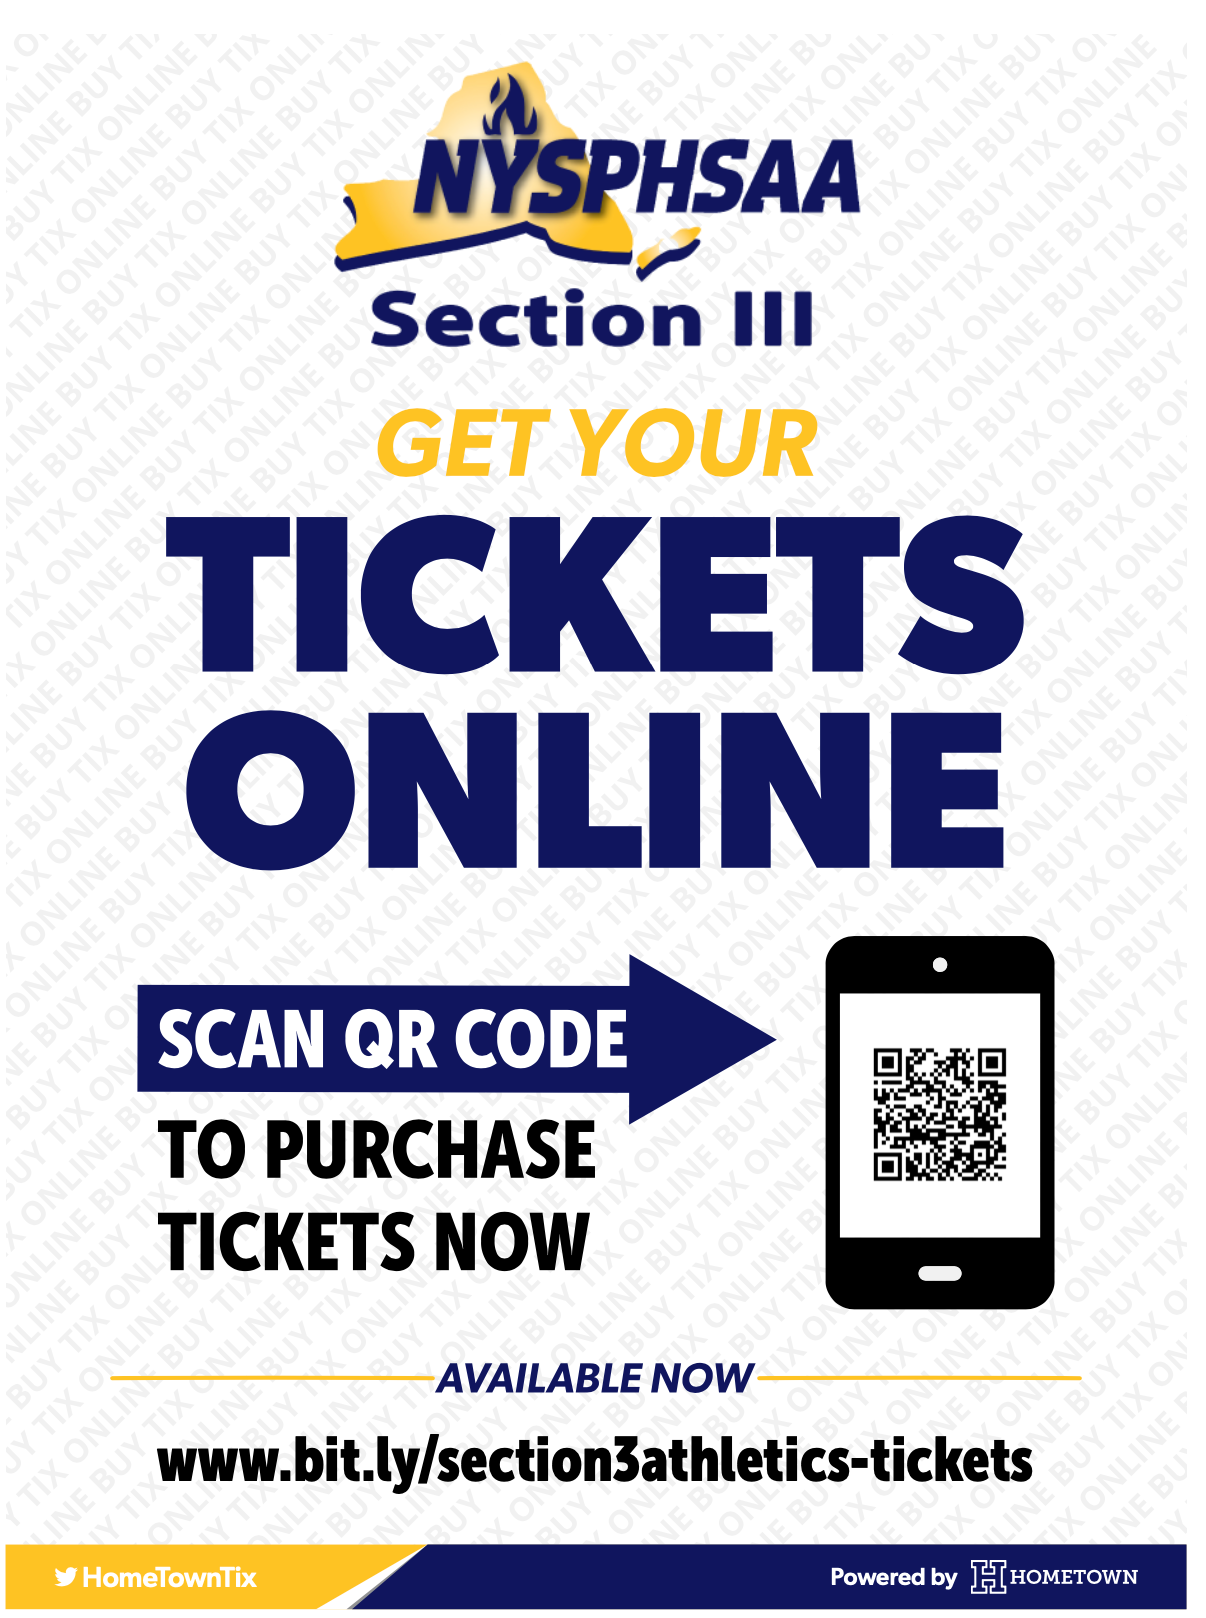 Section III Tickets